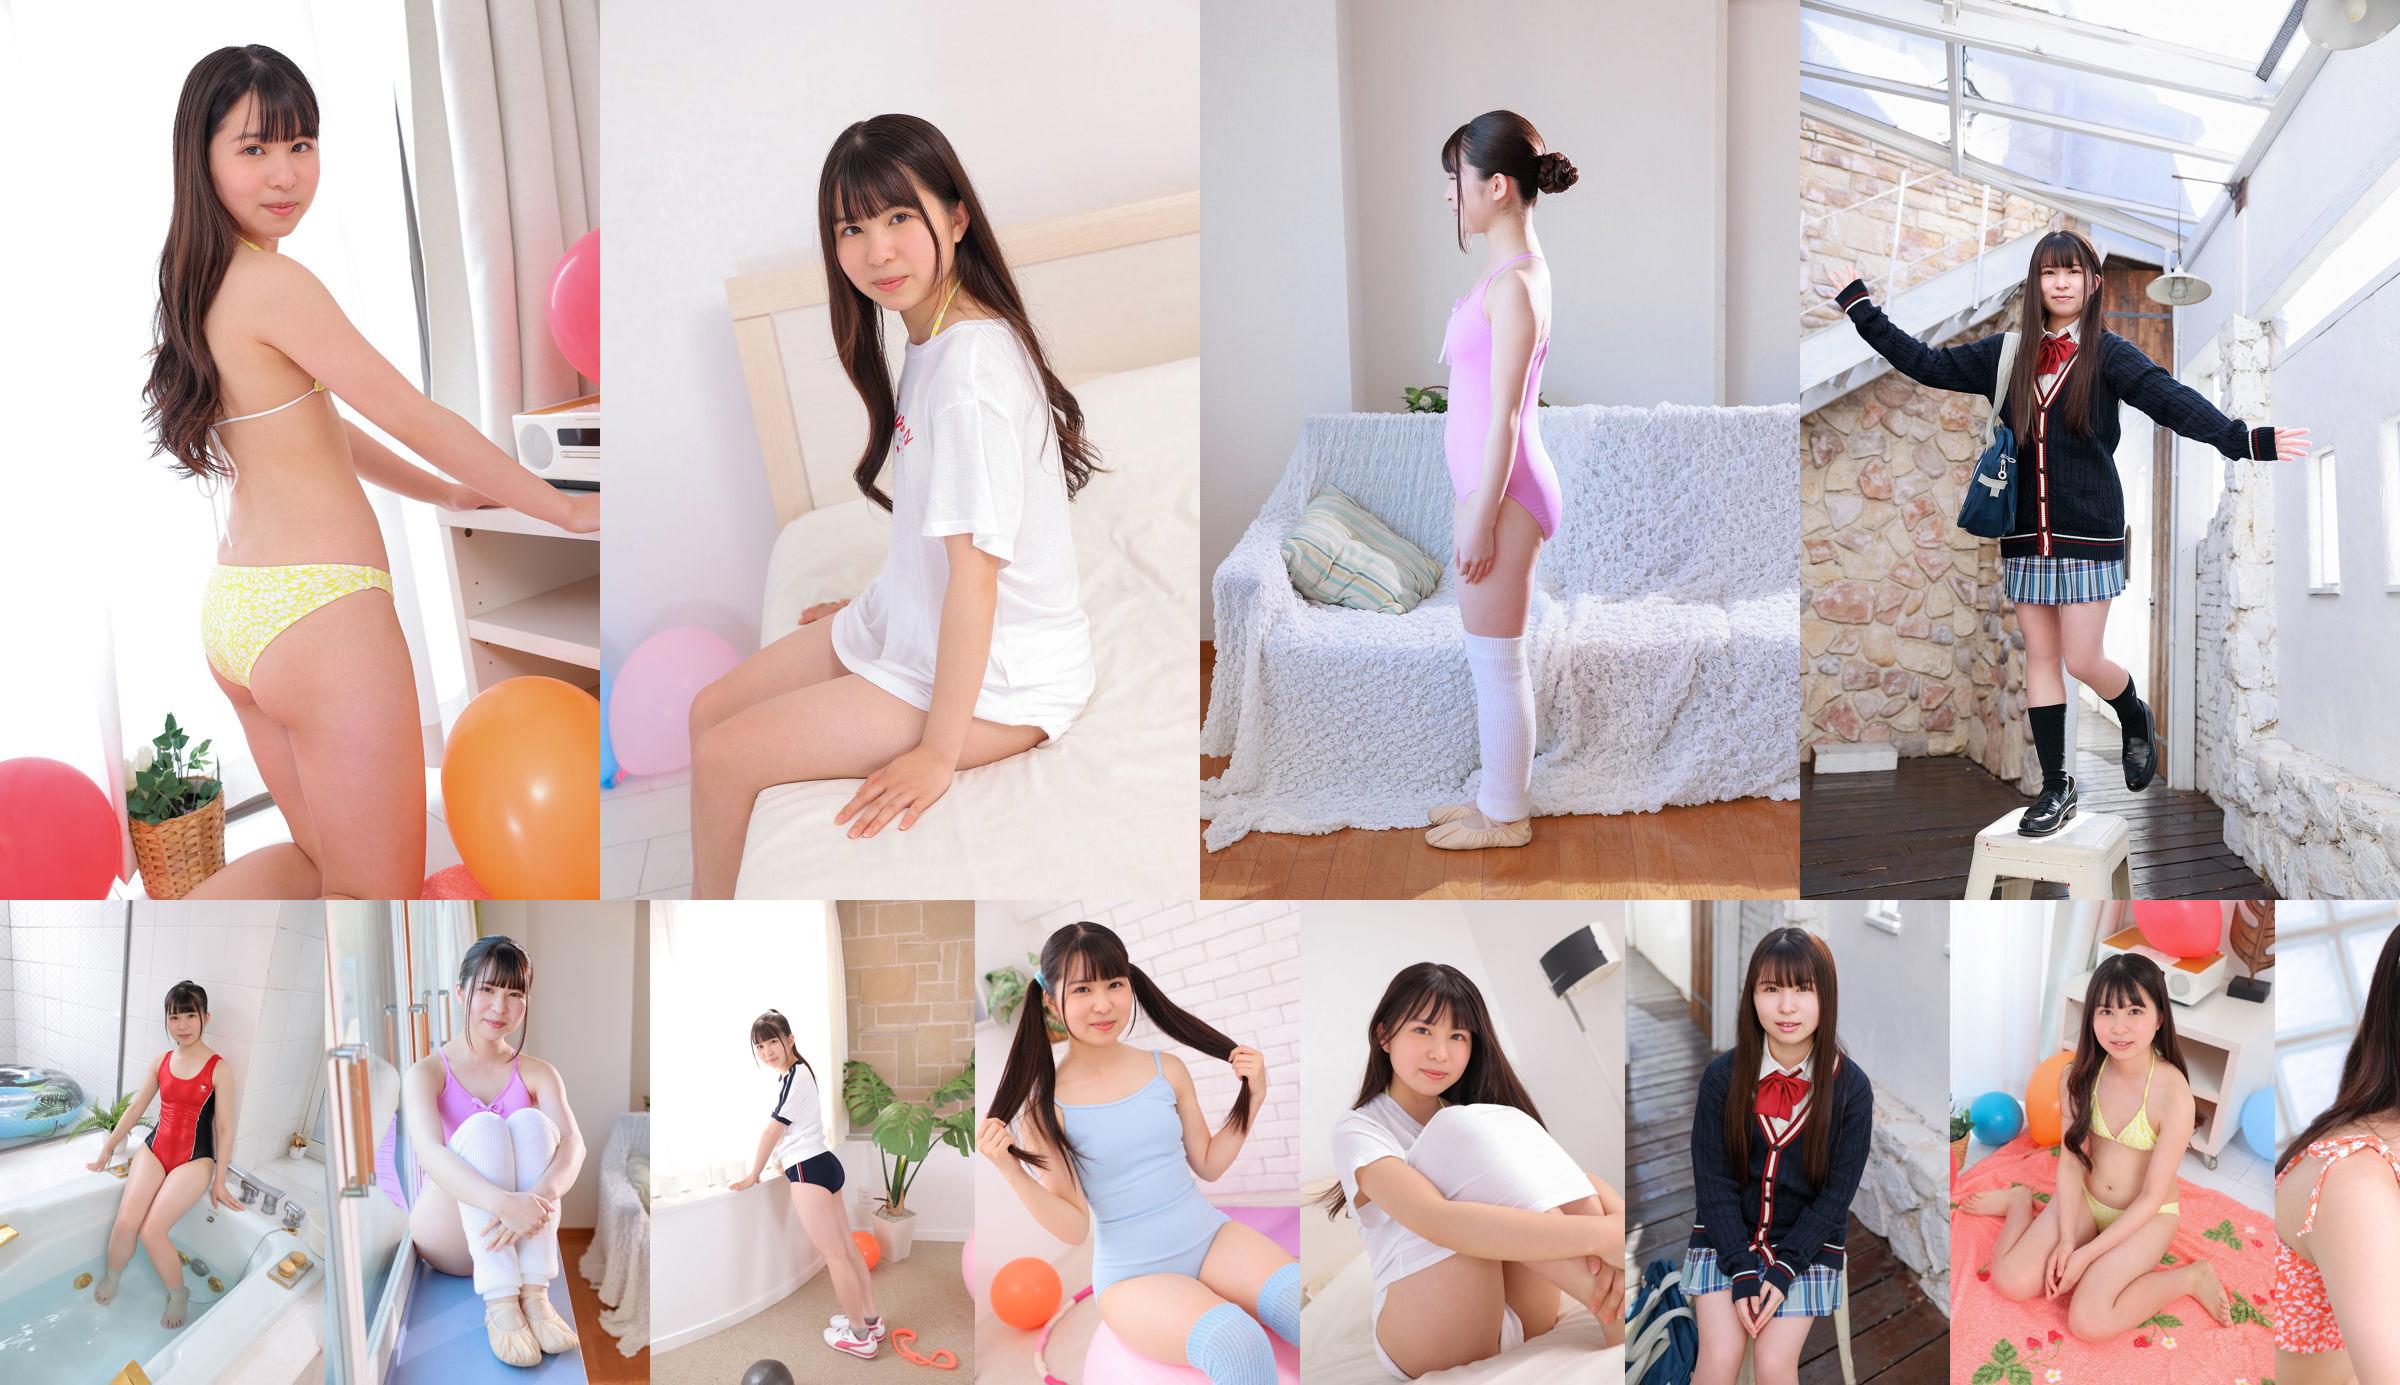 [Minisuka.tv] The Coconuts 心乃うみ - Regular Gallery No.12806a Page 1